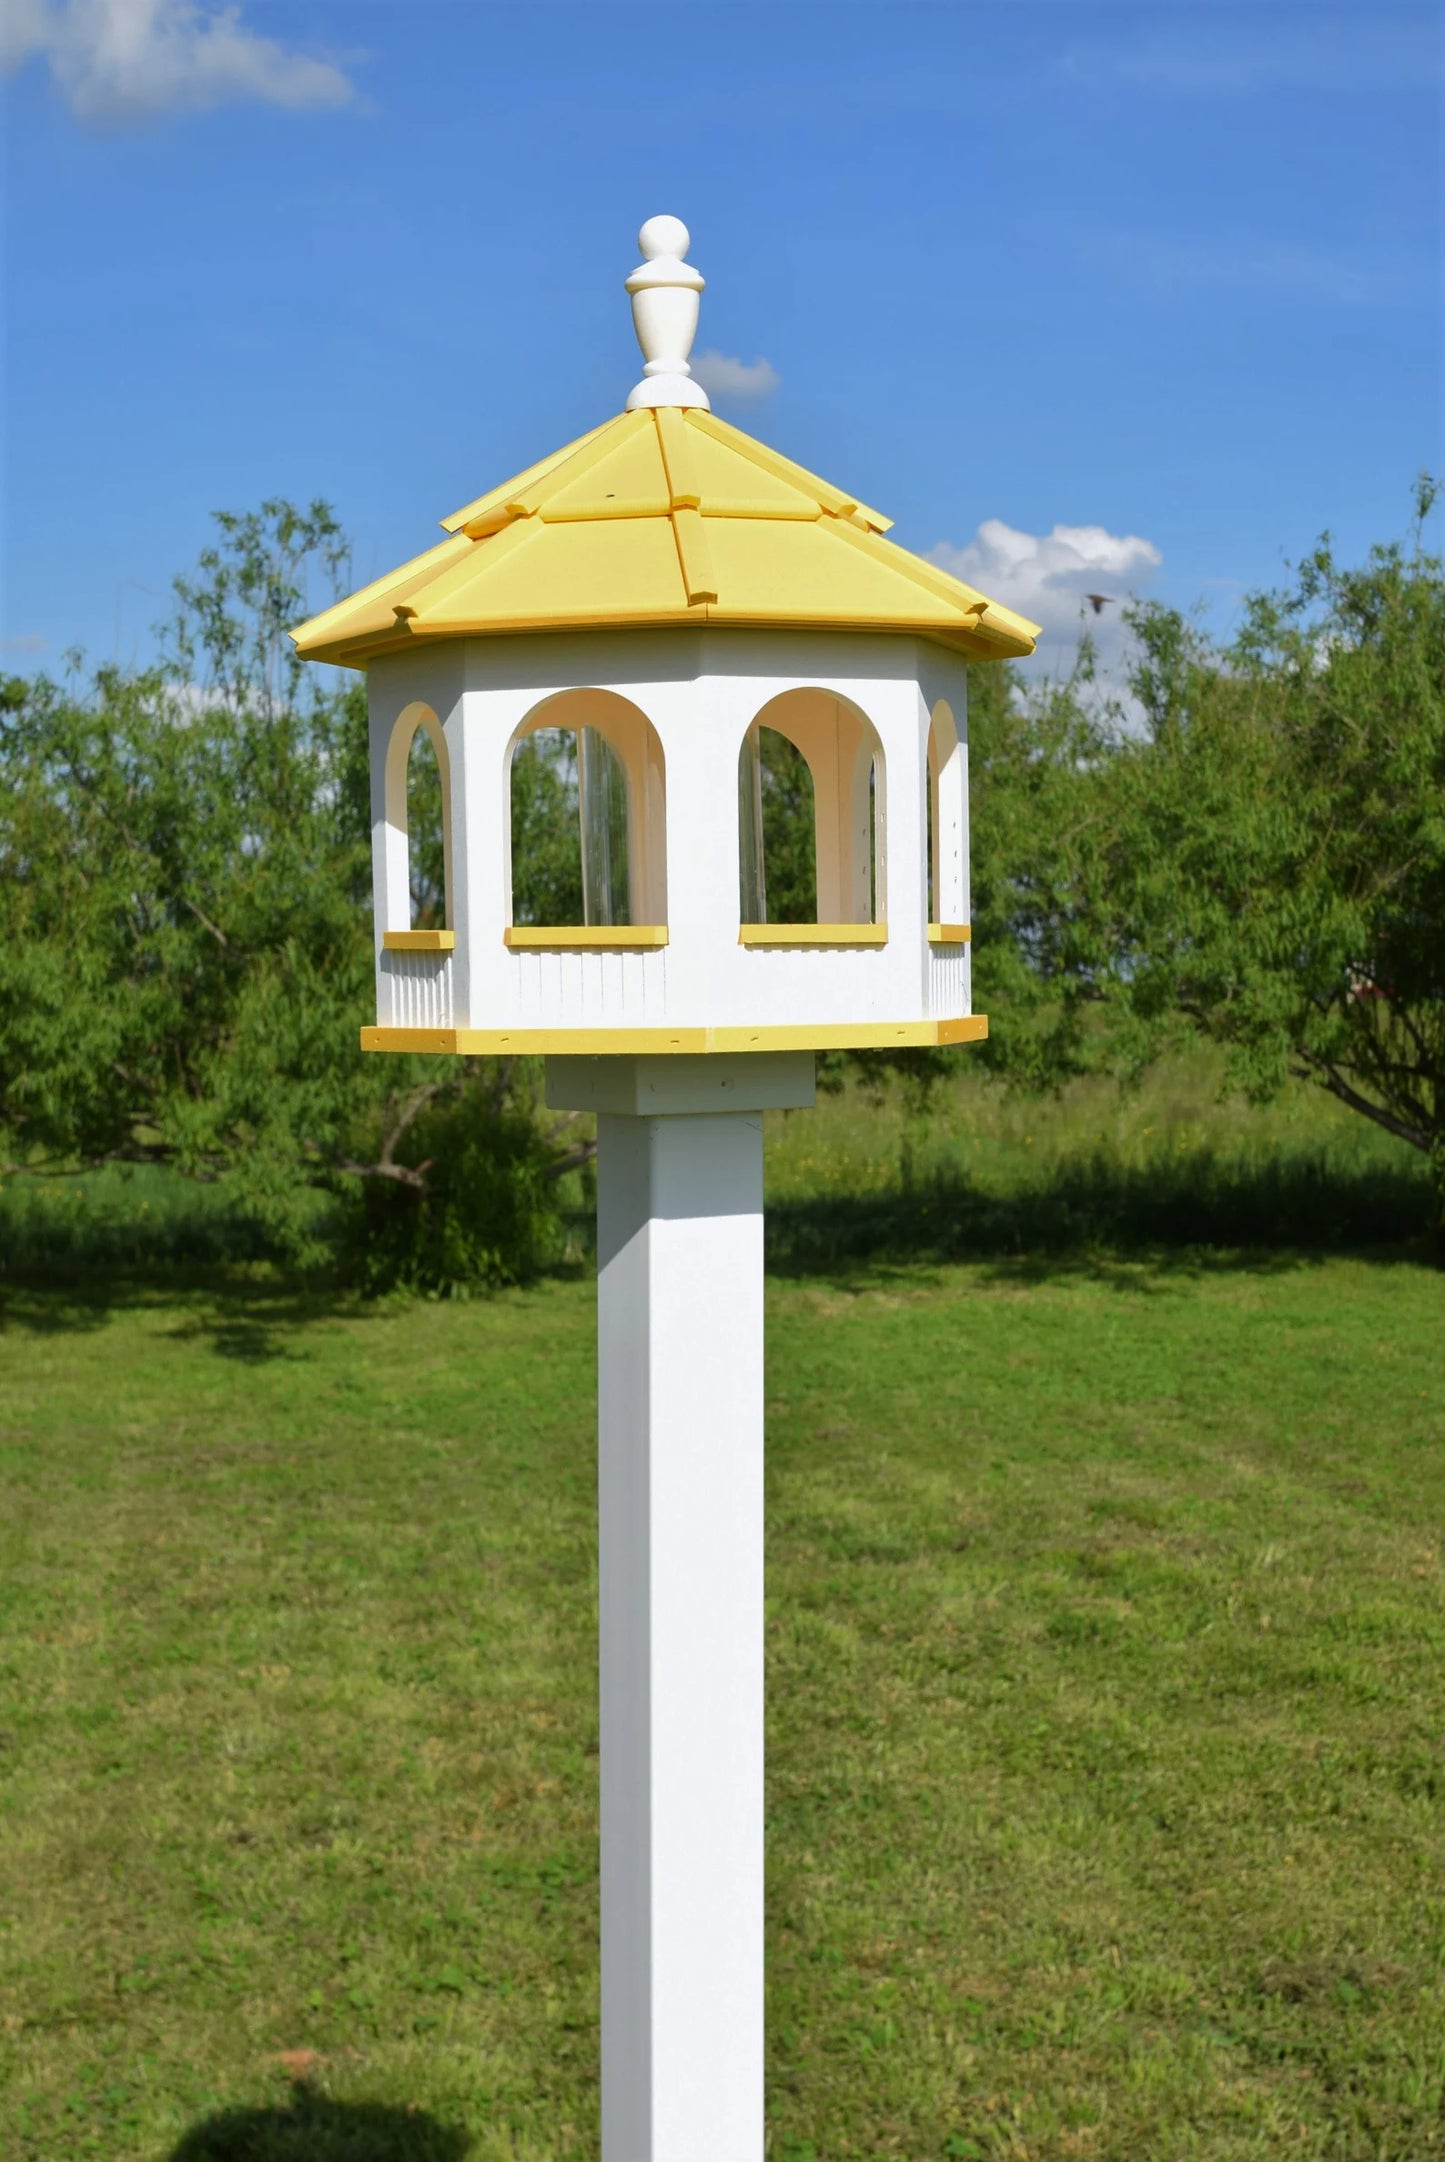 Large Poly Gazebo Arched Bird Feeder | Multiple Bright Colors